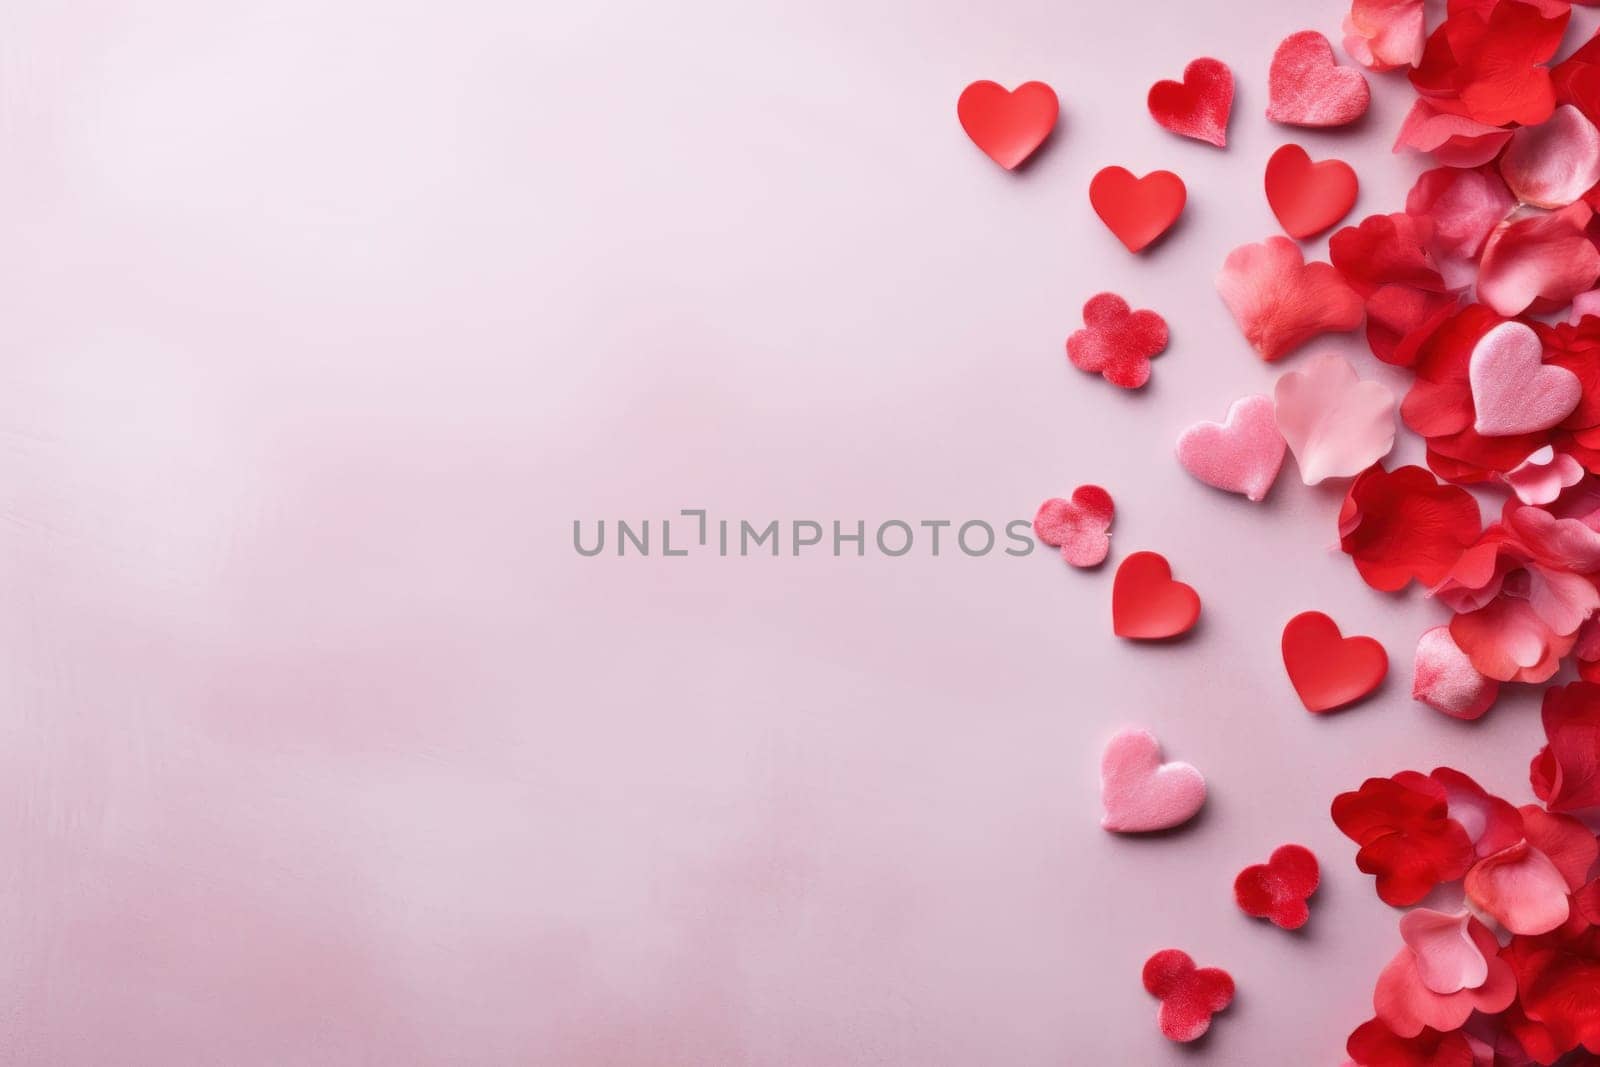 A festive pink background showered with flower petals. Romantic and joyful celebration background